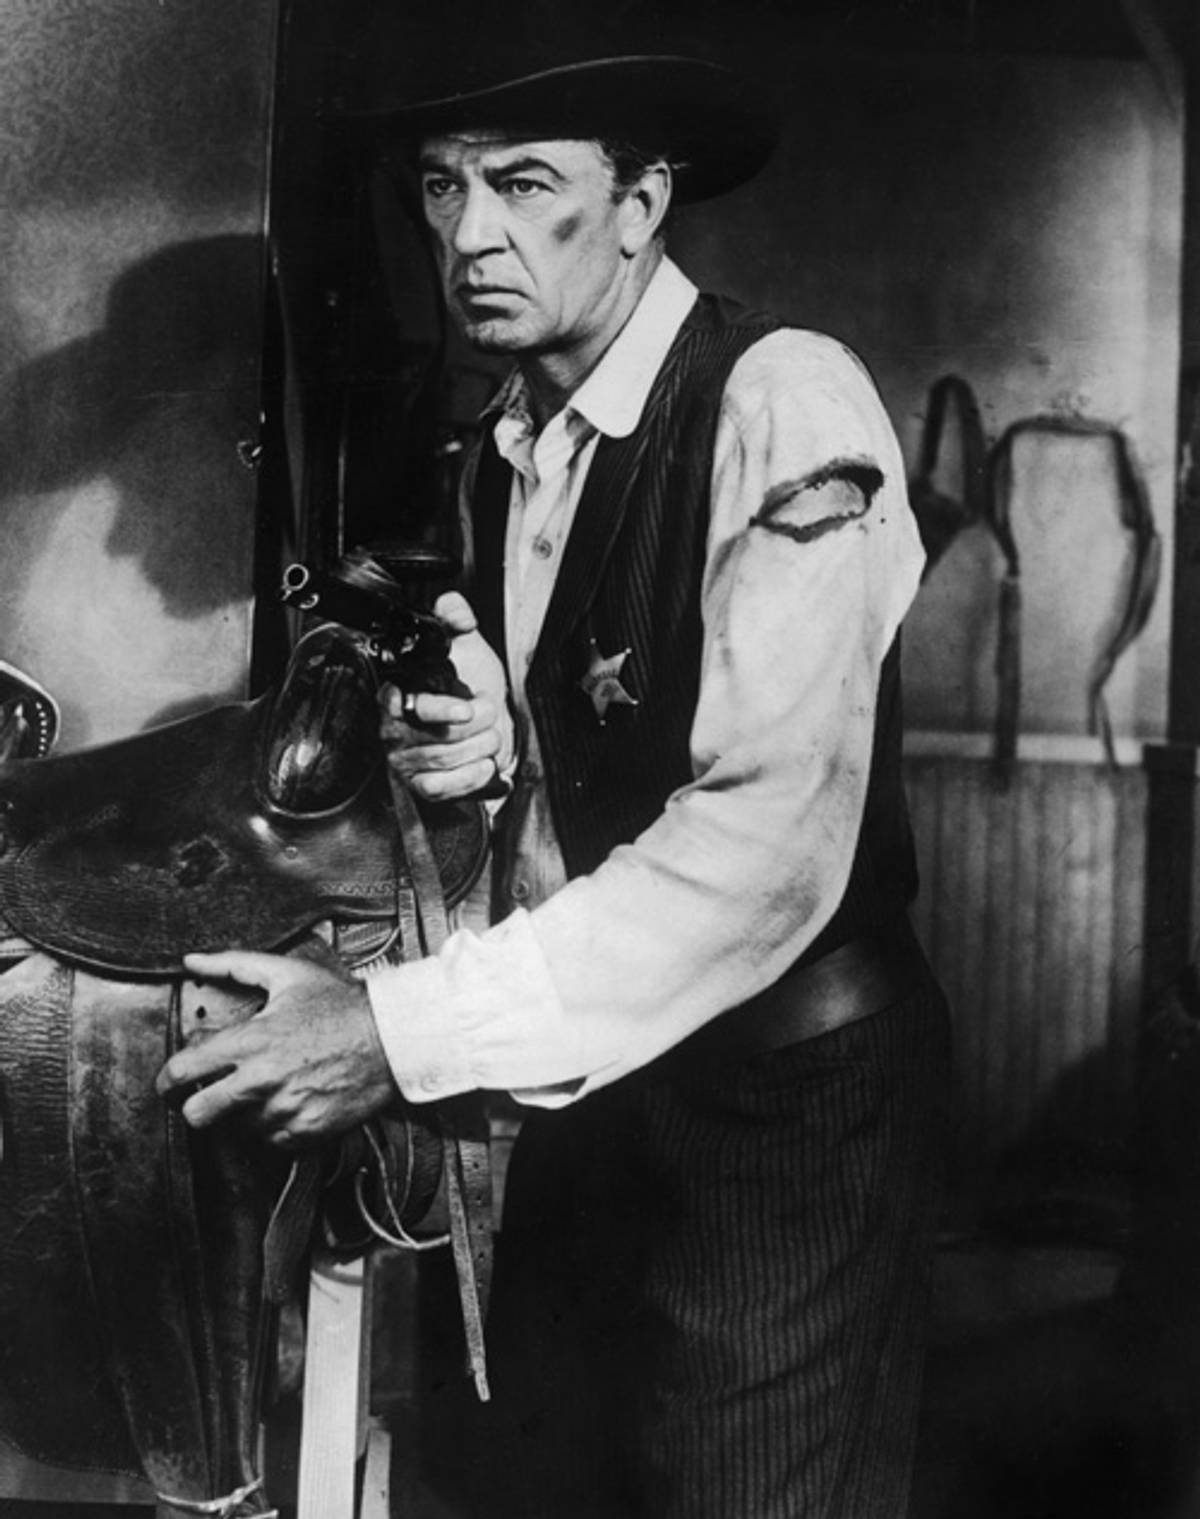 As a model for American leadership, ‘High Noon’ is almost absurdly obsolete. Gary Cooper in Fred Zinnemann’s ‘High Noon,’ 1952. (Photo via John Kobal Foundation/Getty Images)